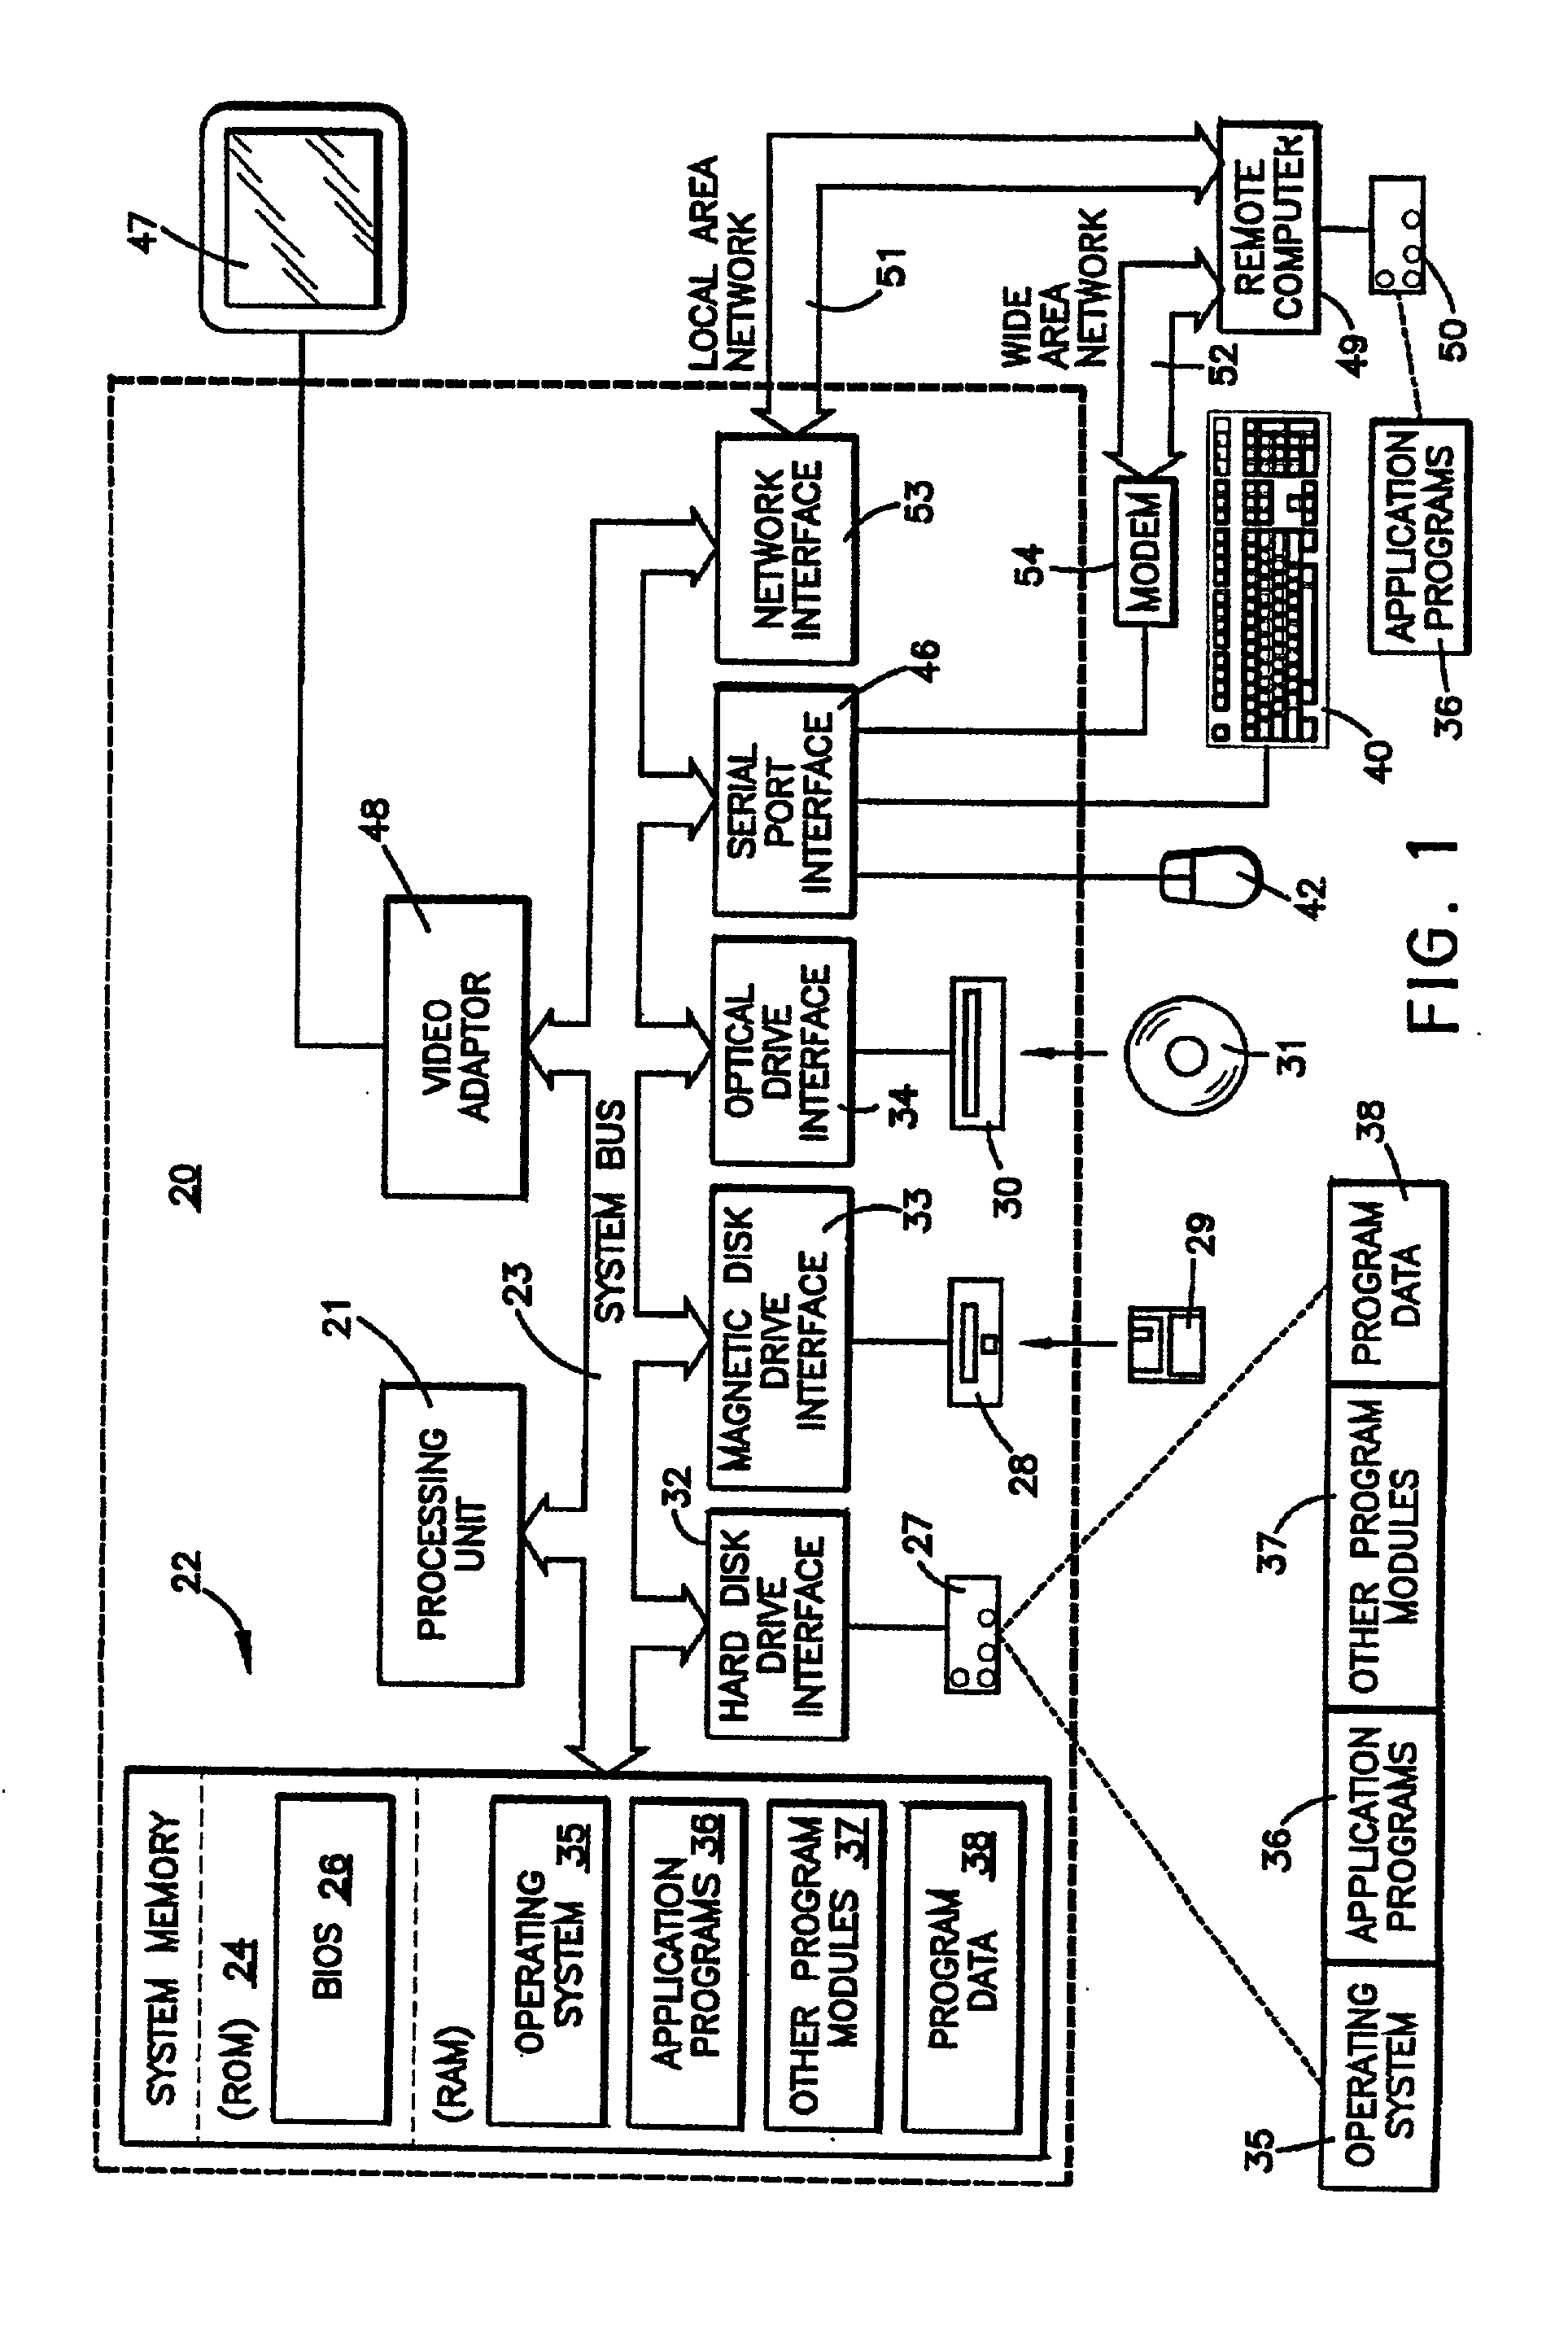 Method for test optimization using historical and actual fabrication test data